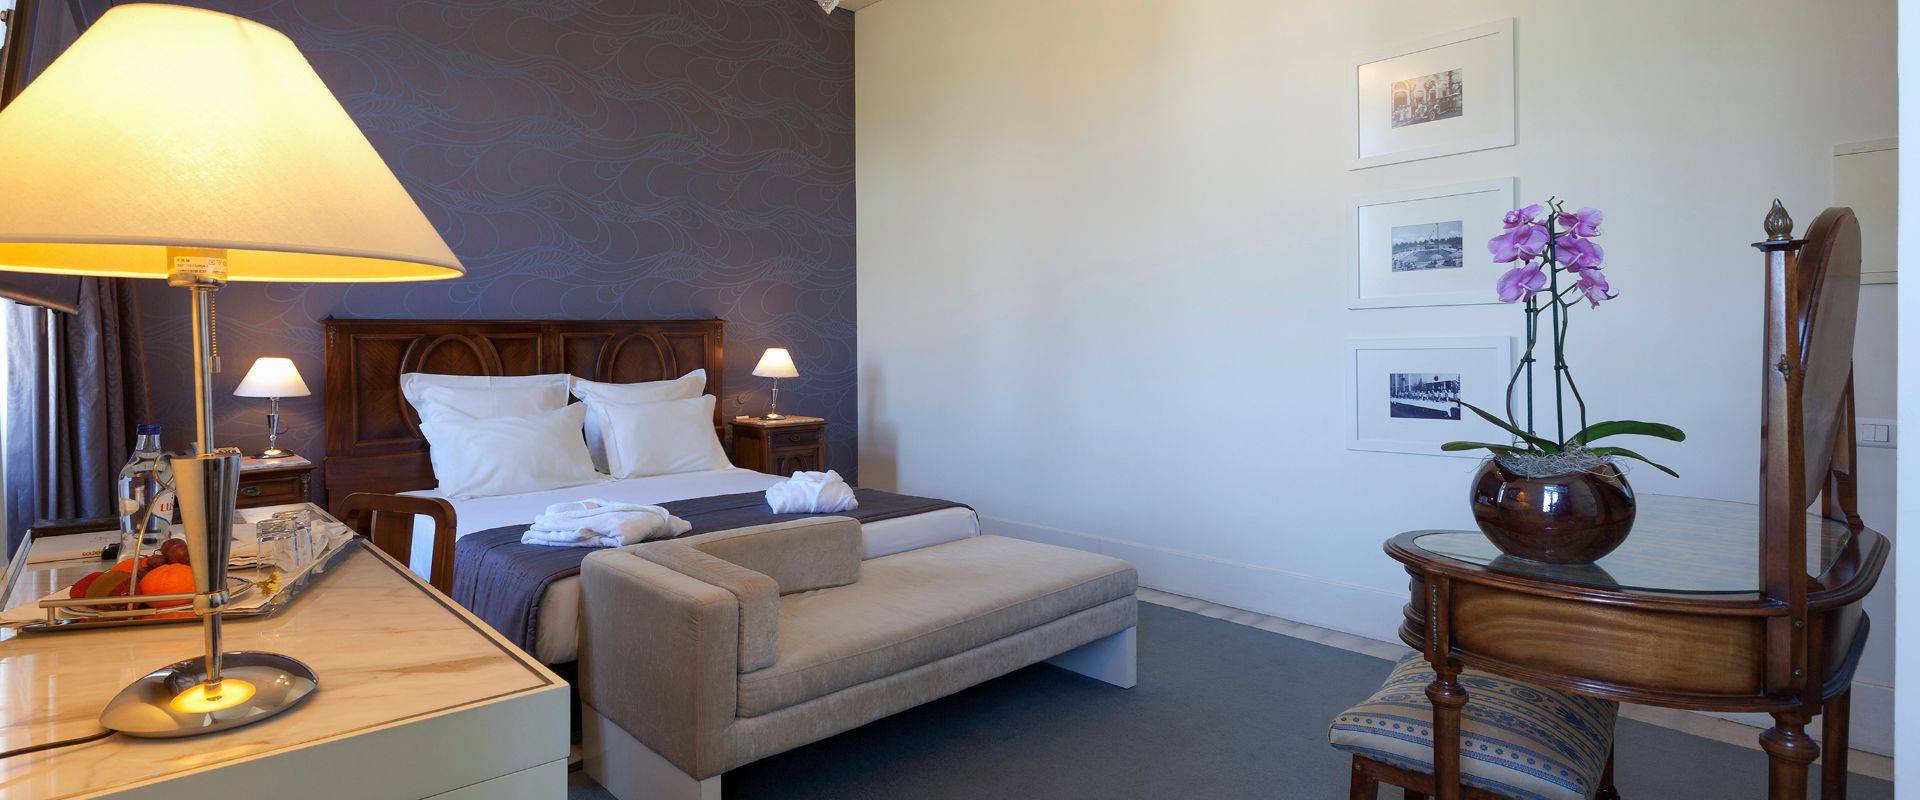 Classic room with two individual beds and interior pateo view  Curia Palace Hotel Coimbra